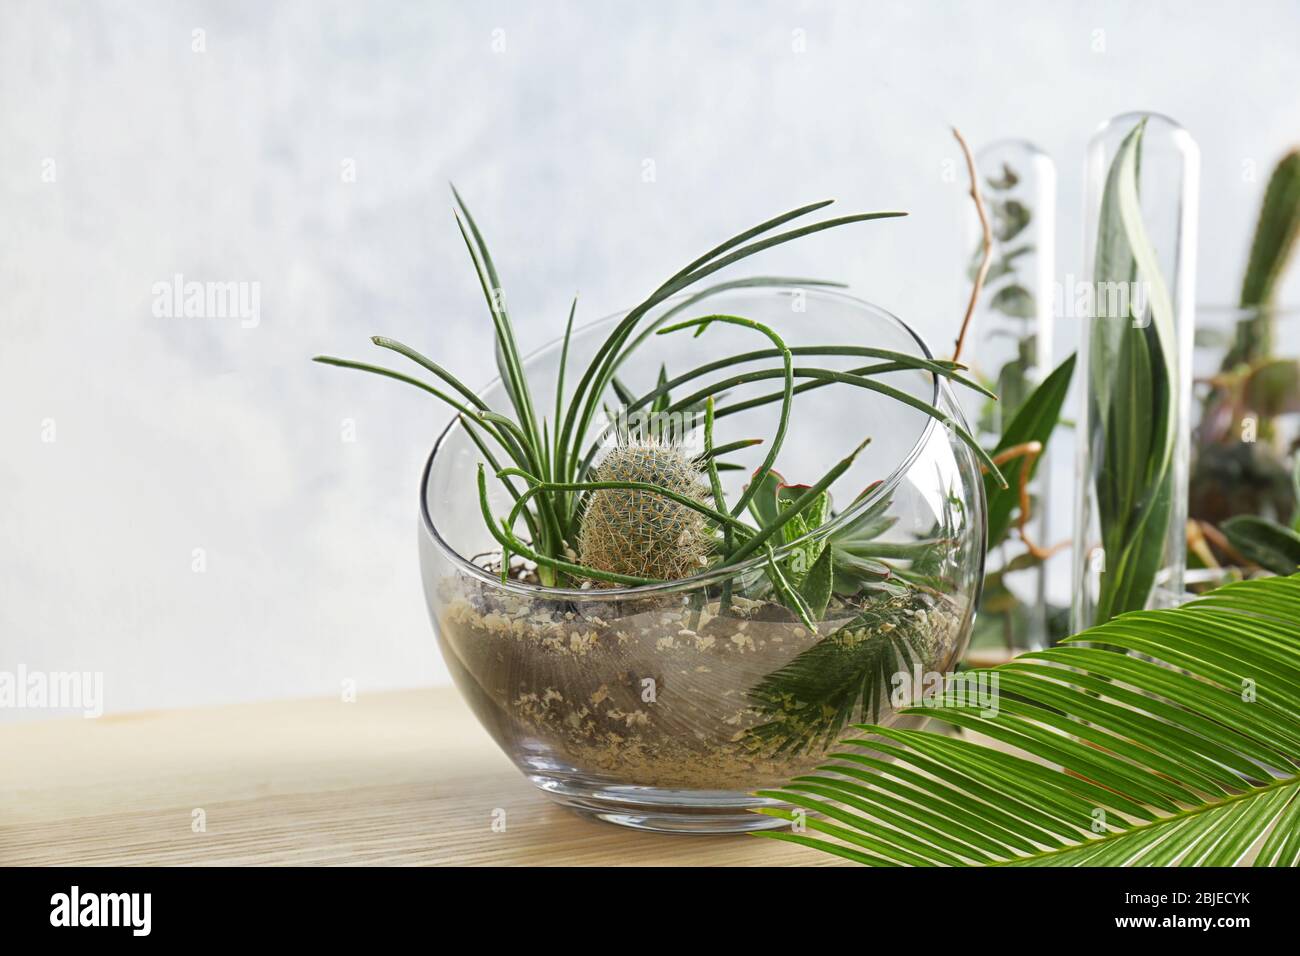 Florarium in glass vase with succulents on wooden table Stock Photo